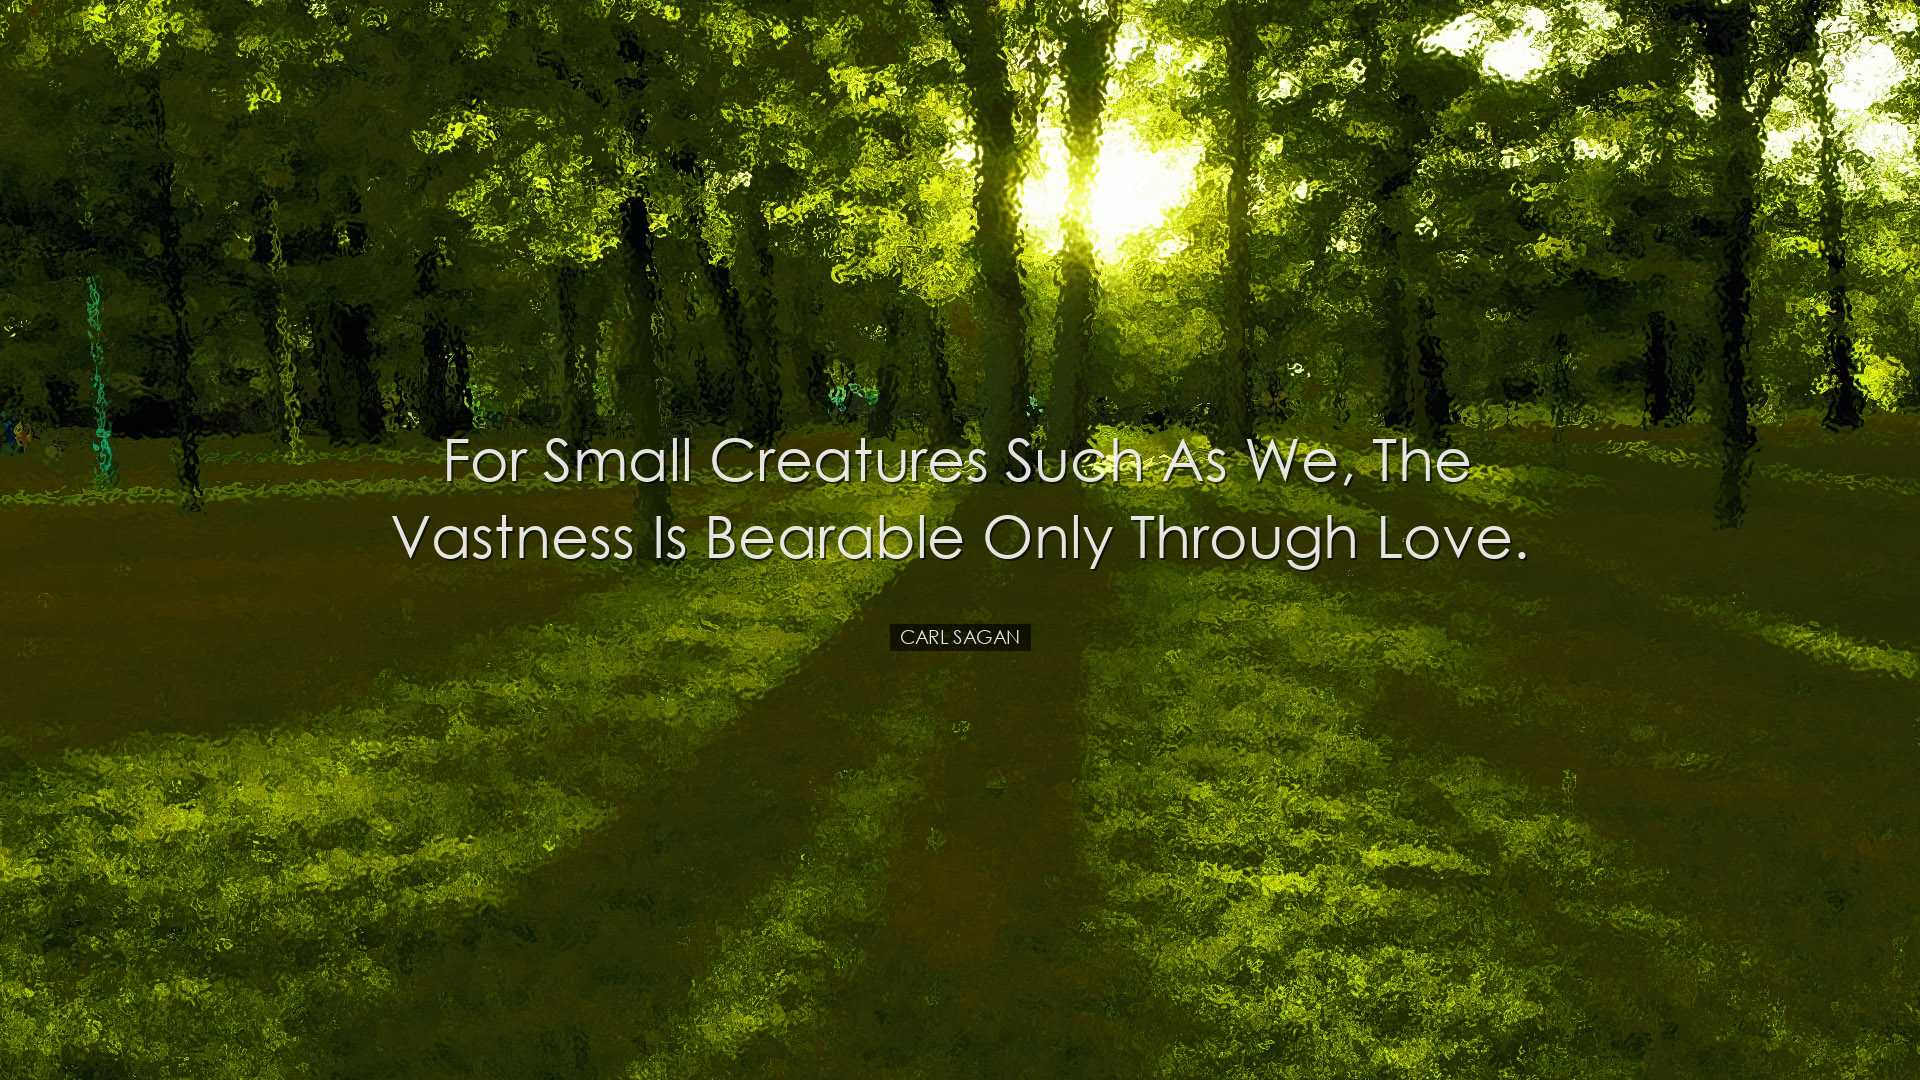 For small creatures such as we, the vastness is bearable only thro